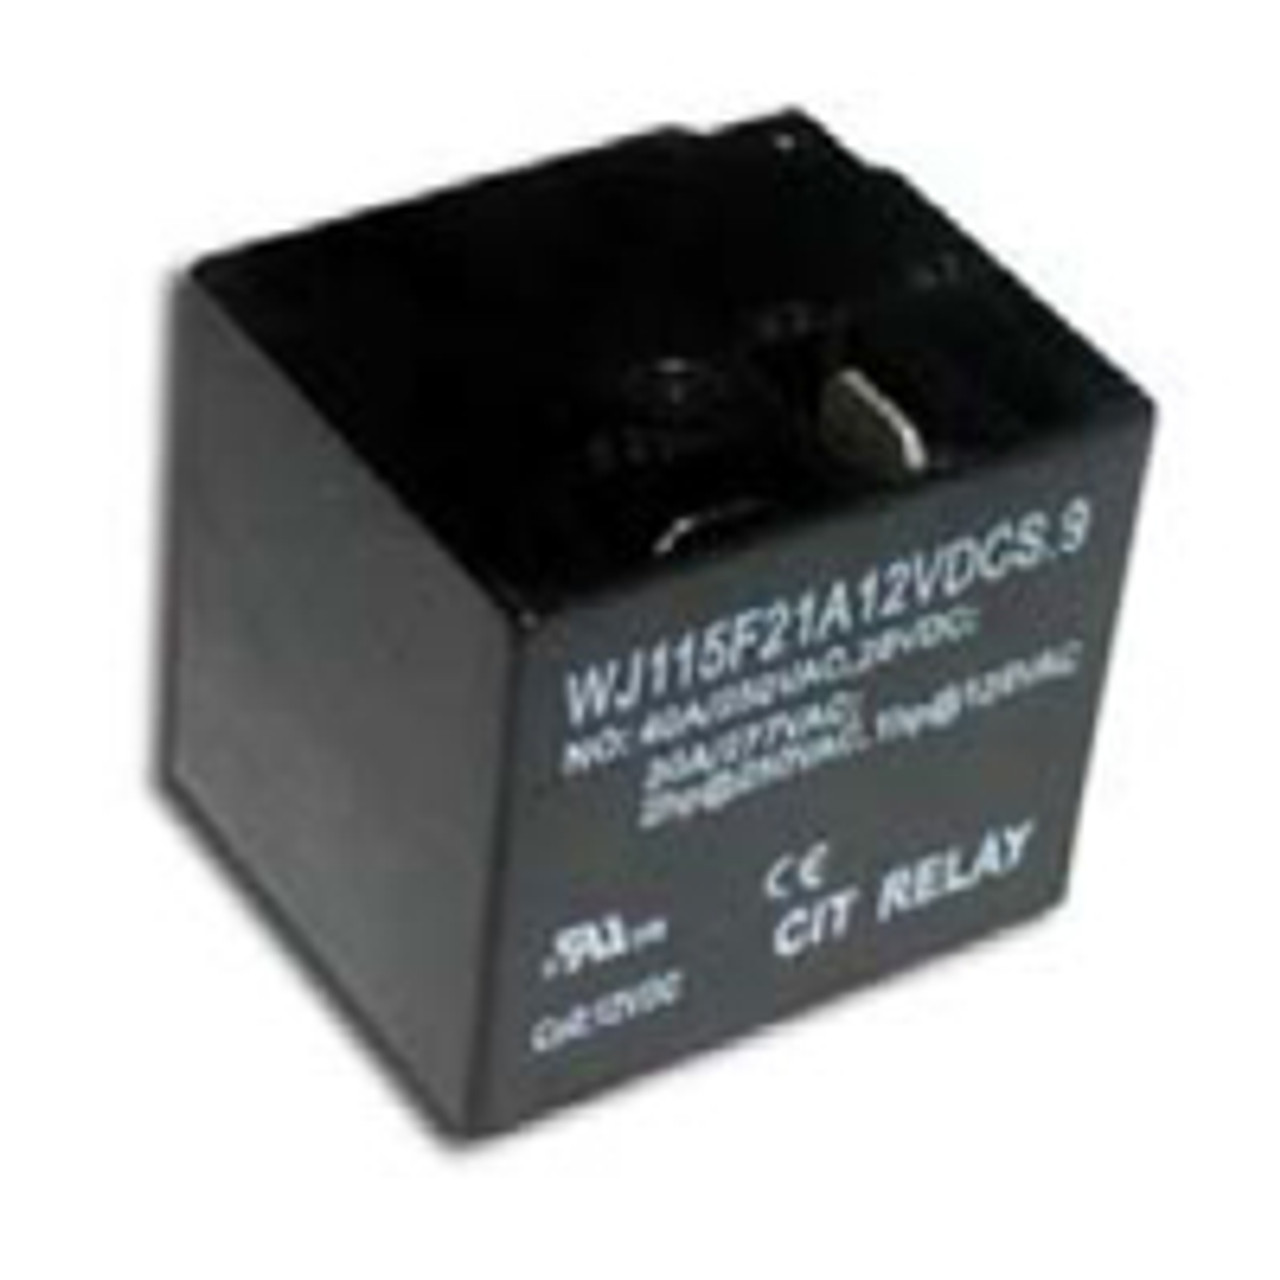 CIT Relay and Switch J115F21C9VDCS.9U Power Relays